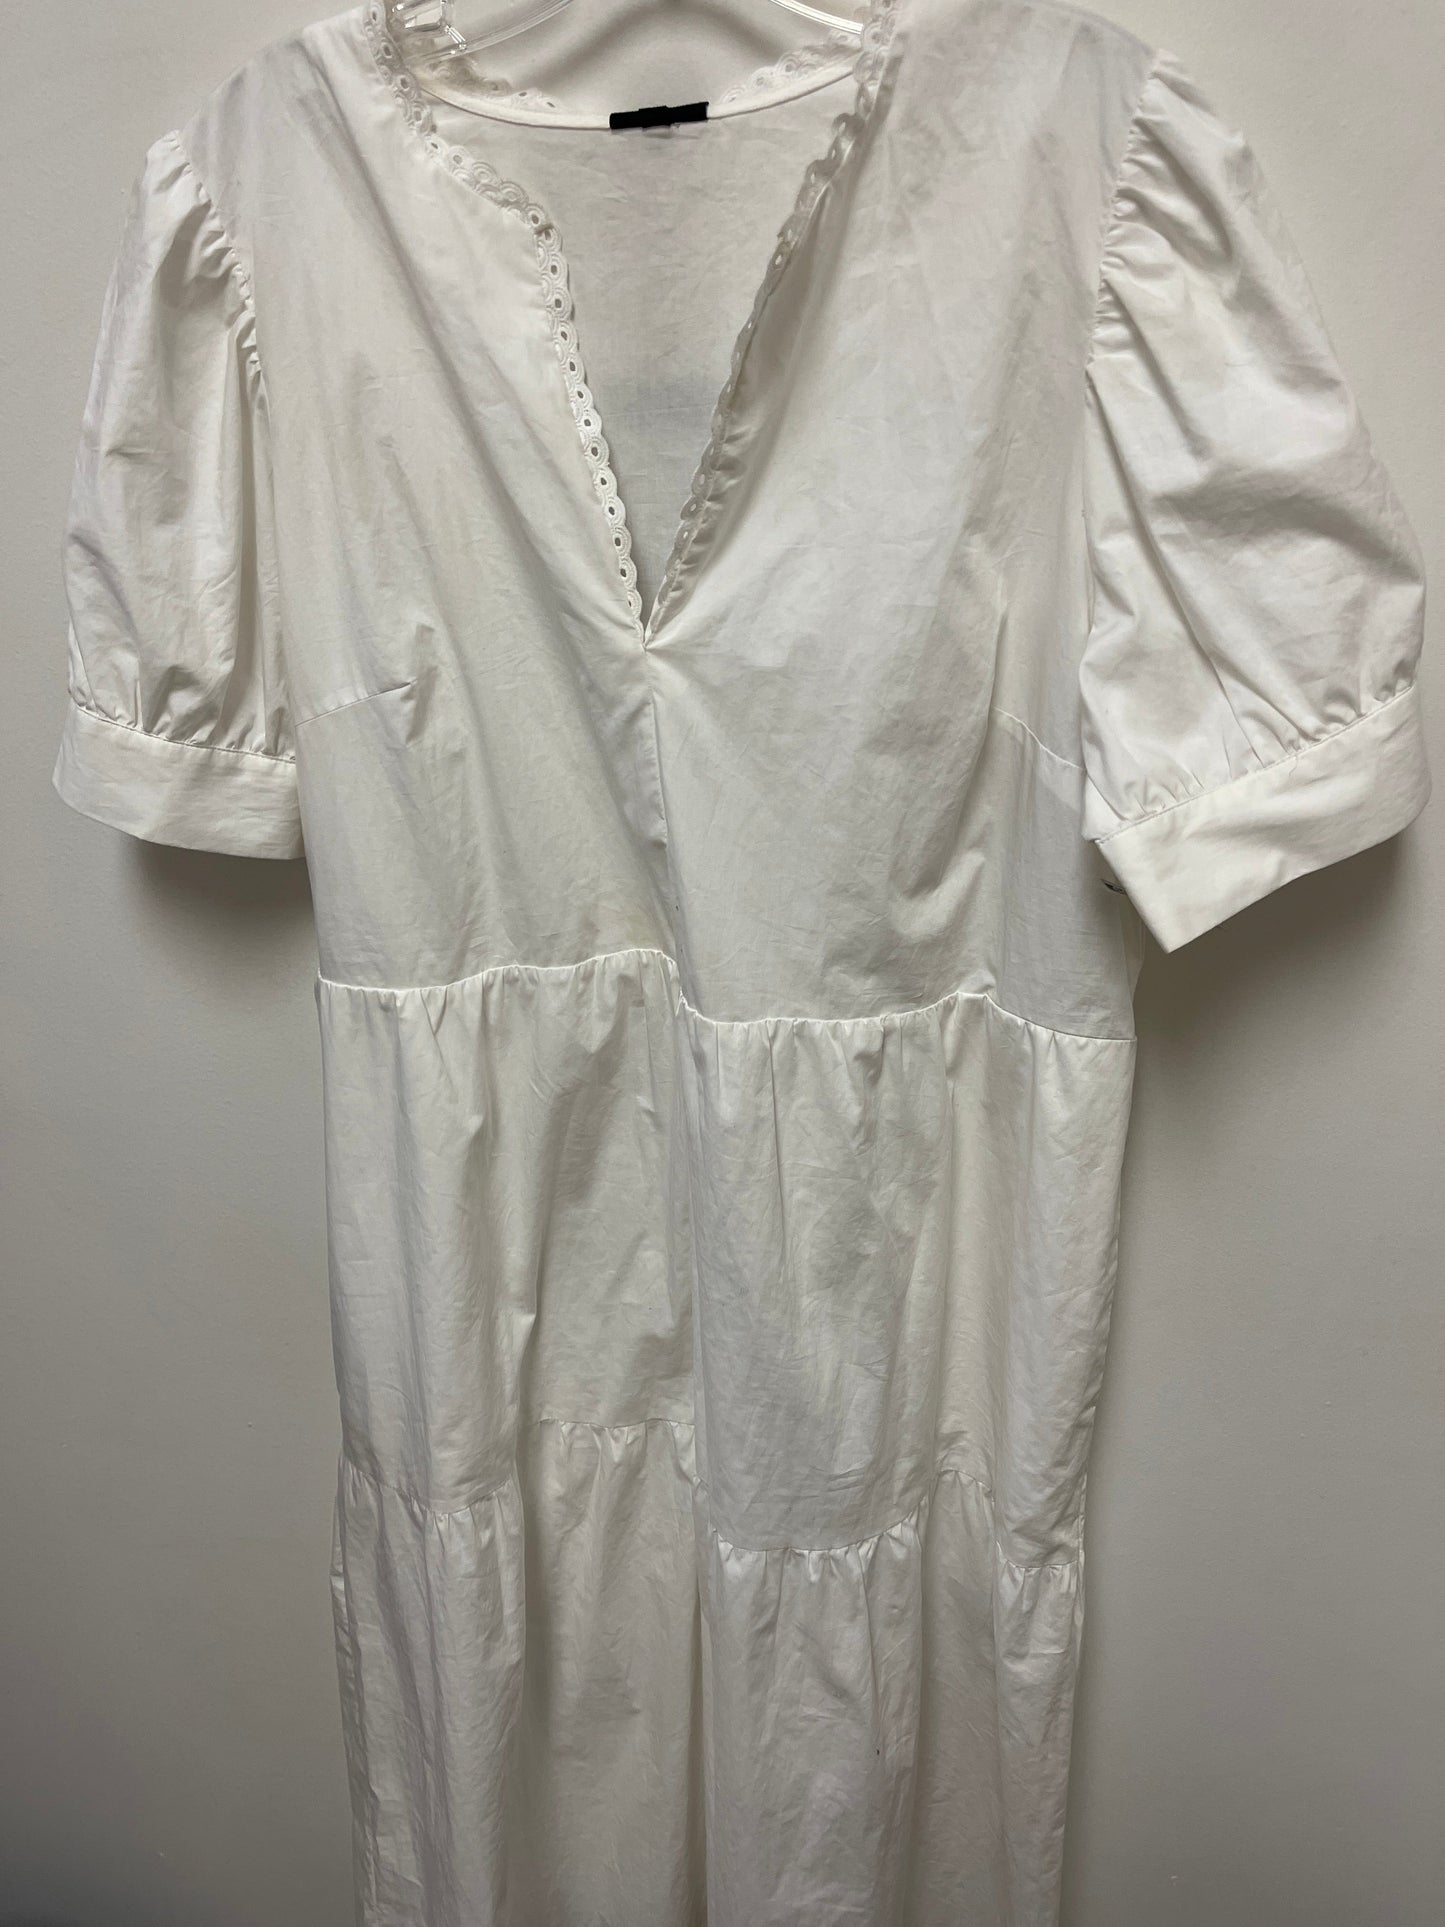 White Dress Casual Maxi Who What Wear, Size 2x